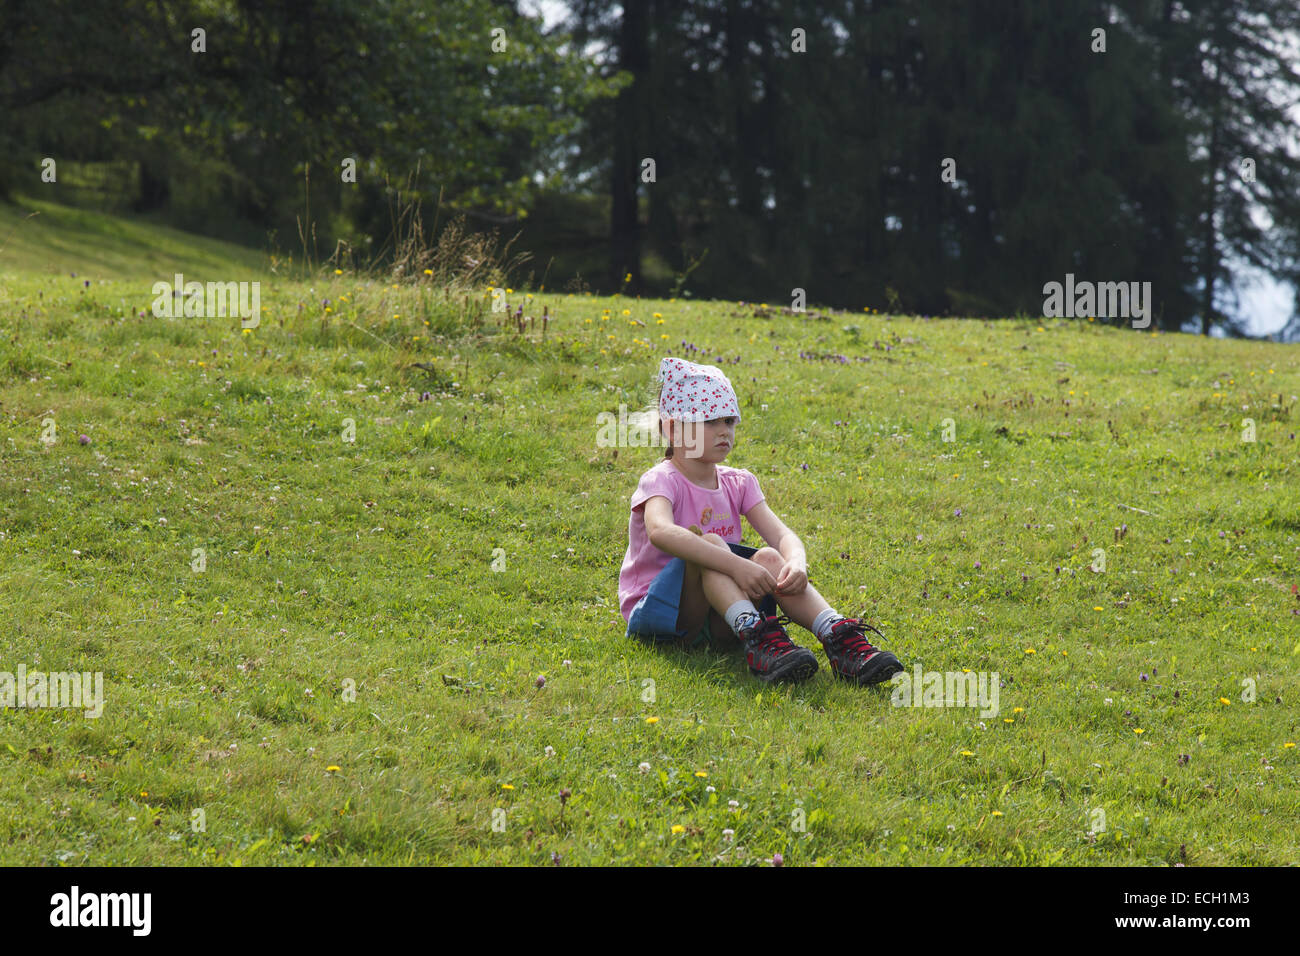 Girl sitting in grass Banque D'Images